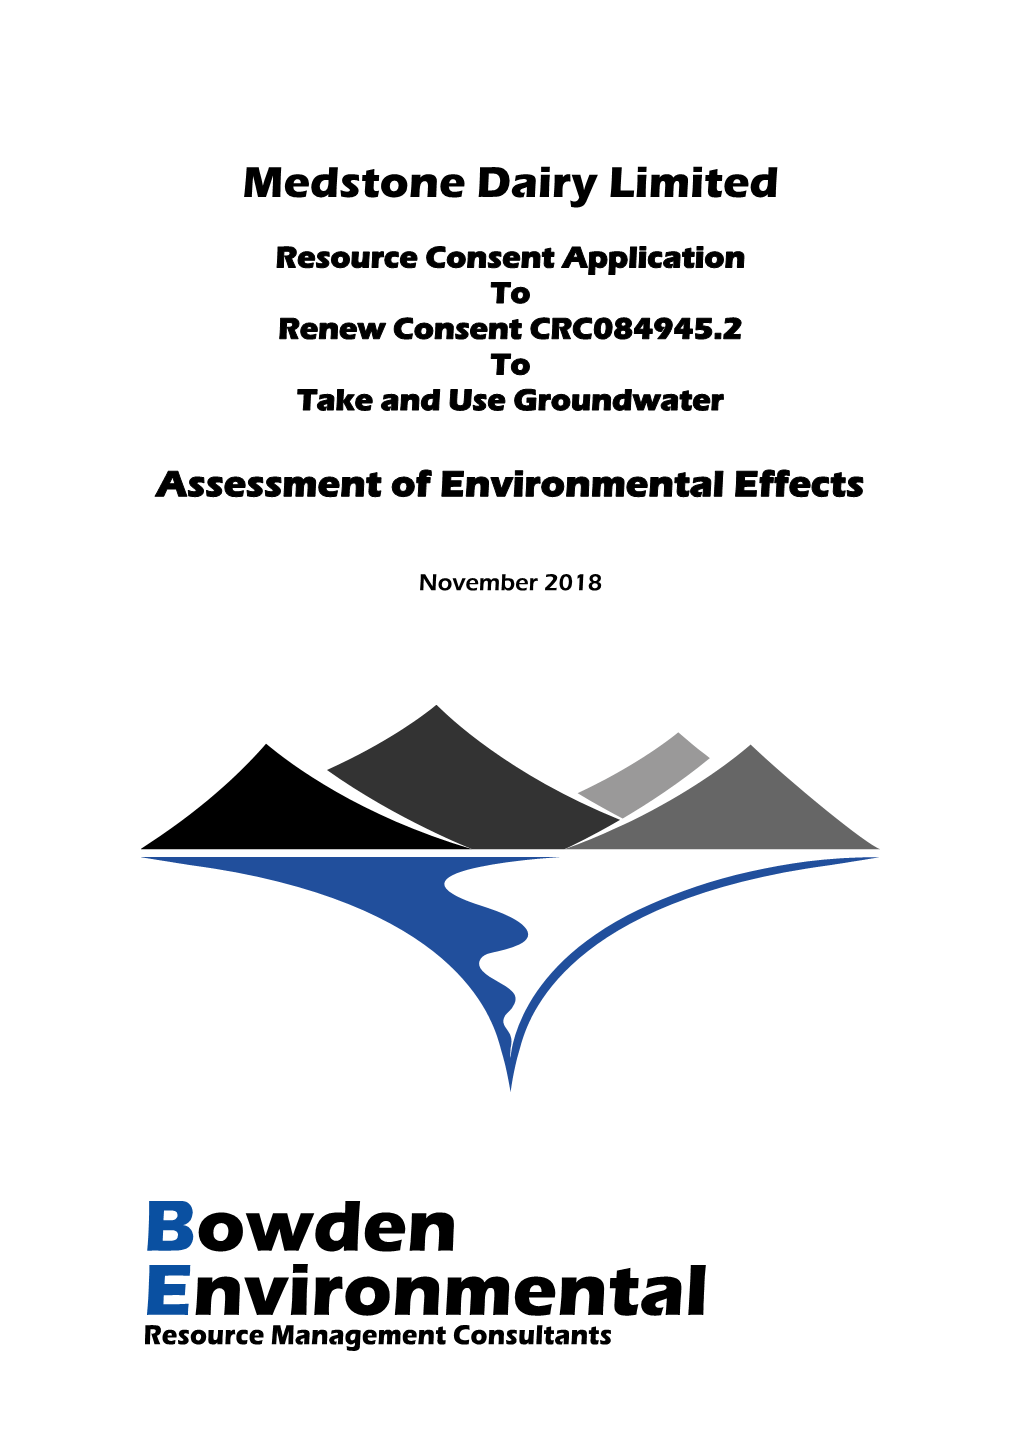 Groundwater Consent Are Acceptable for Both Bores (These Are to Be Provided to the Applicant in Draft Form for Final Acceptance)